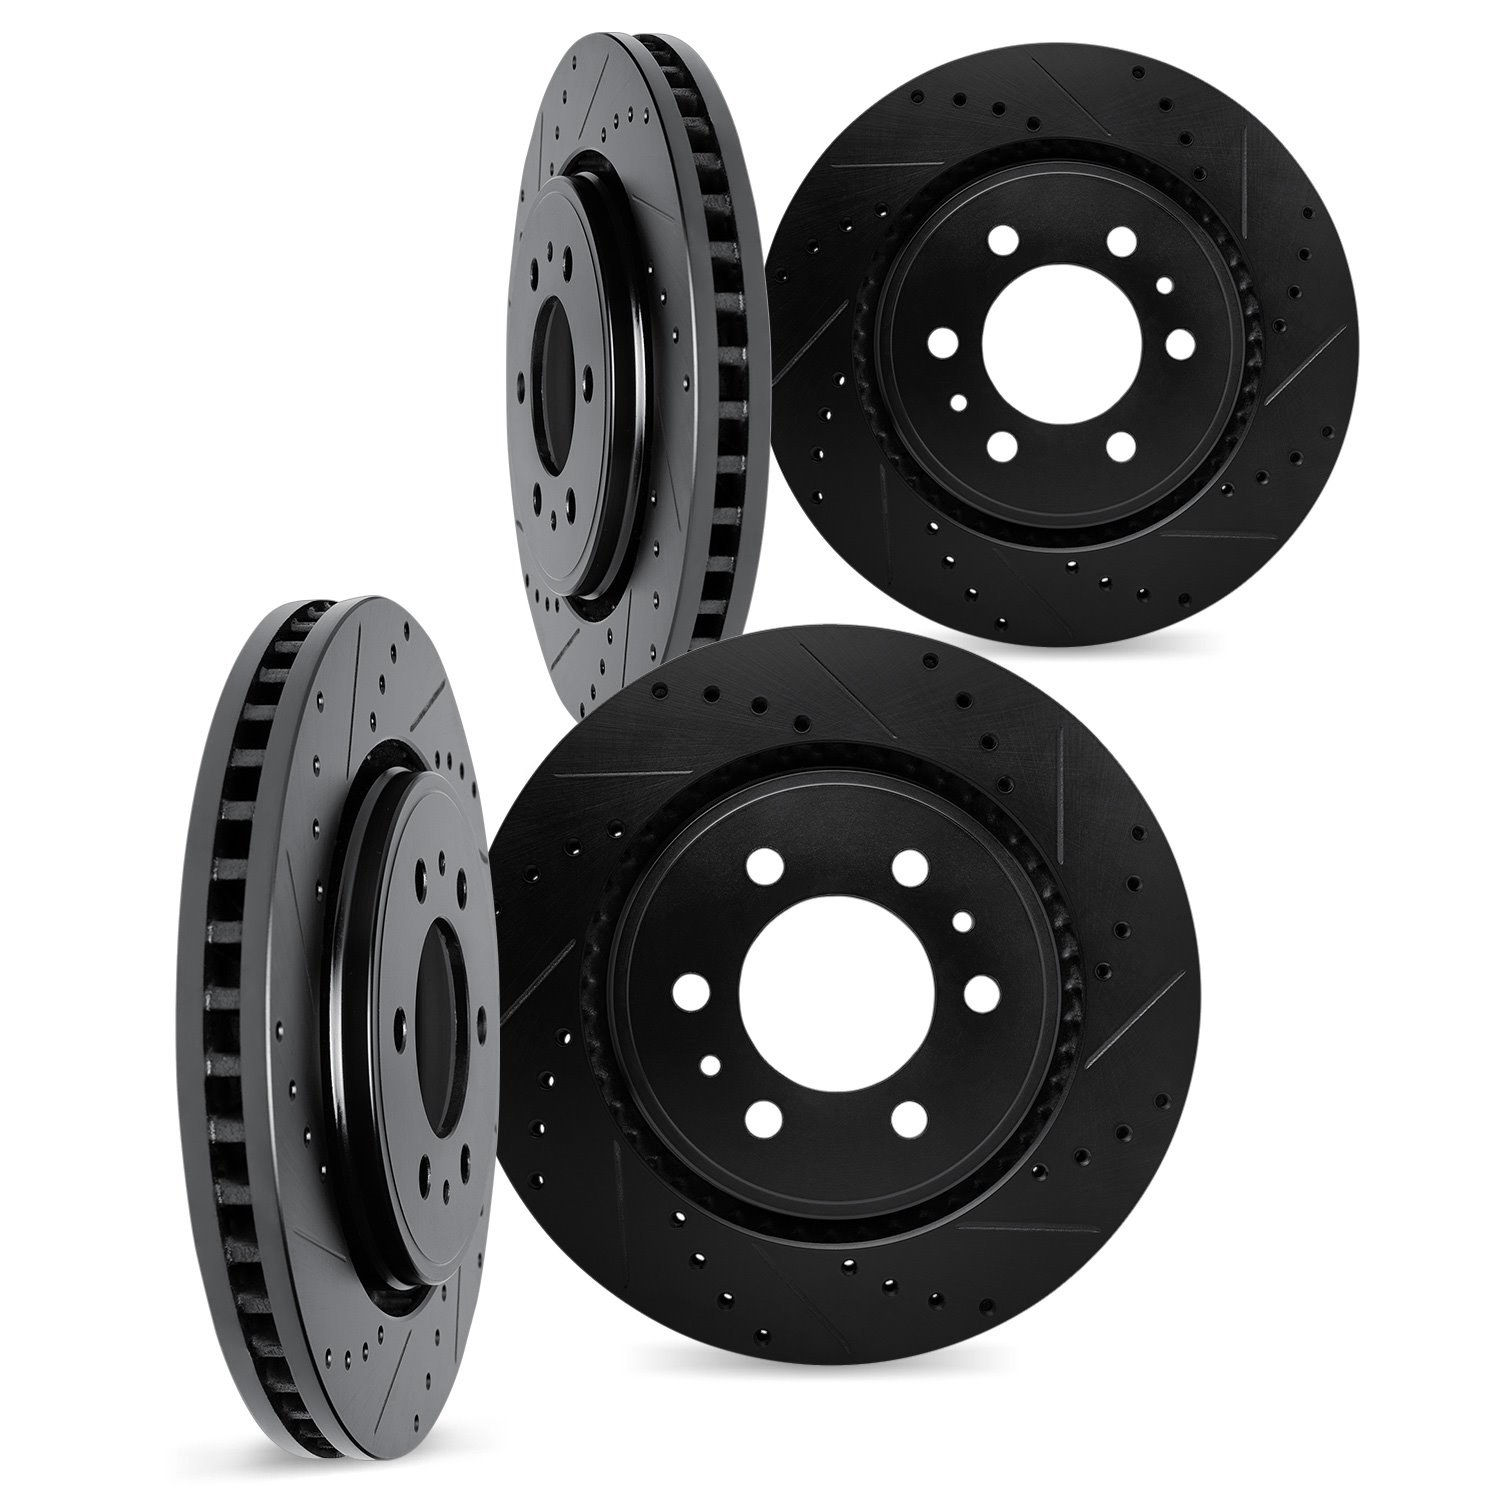 8004-76039 Drilled/Slotted Brake Rotors [Black], 2003-2009 Lexus/Toyota/Scion, Position: Front and Rear